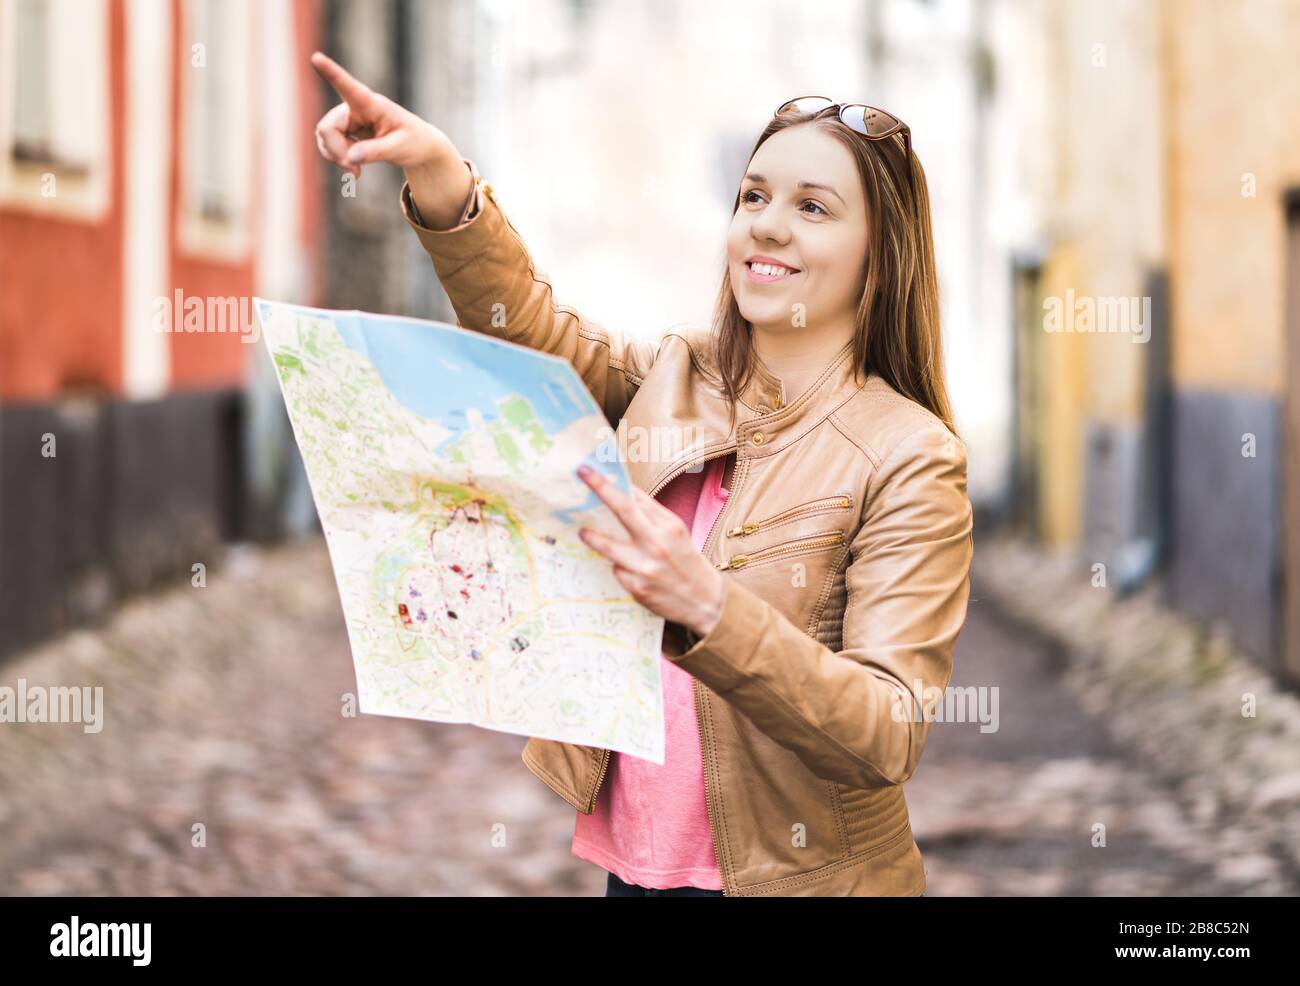 Tourist with map in the city. Woman pointing at right direction or showing attraction with finger. Happy traveler using tourism guide. Stock Photo